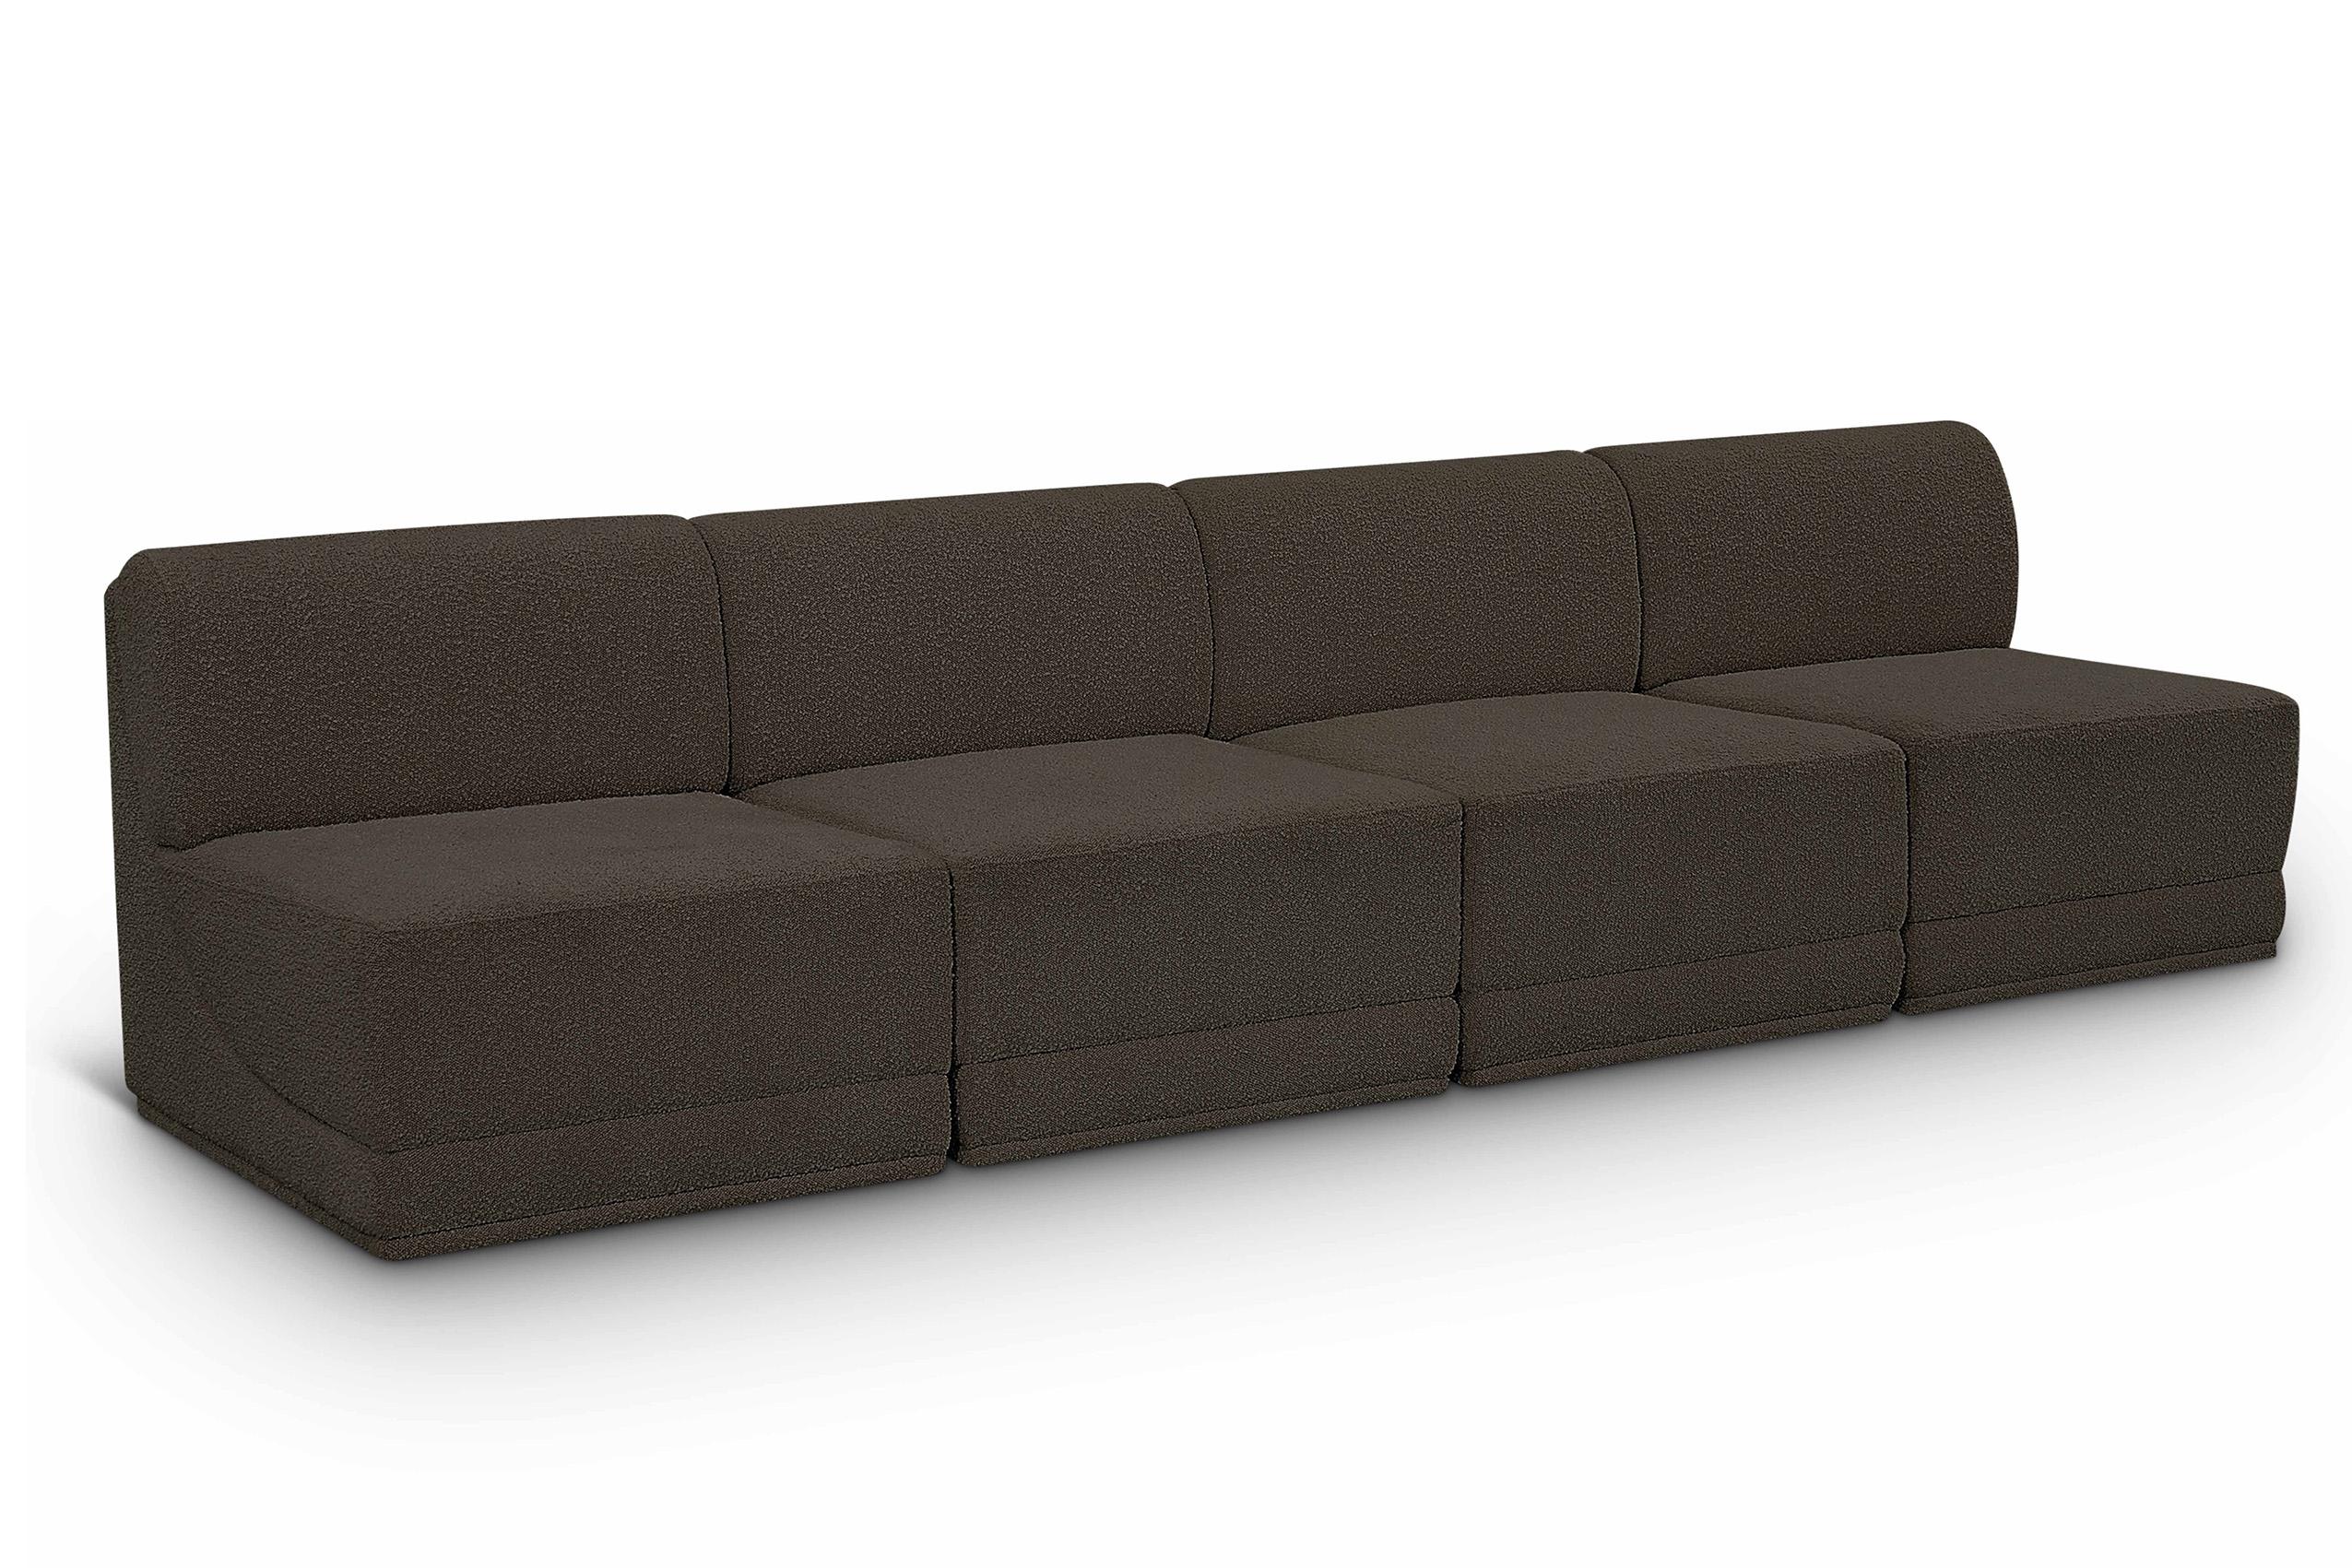 Contemporary, Modern Modular Sofa Ollie 118Brown-S120 118Brown-S120 in Brown 